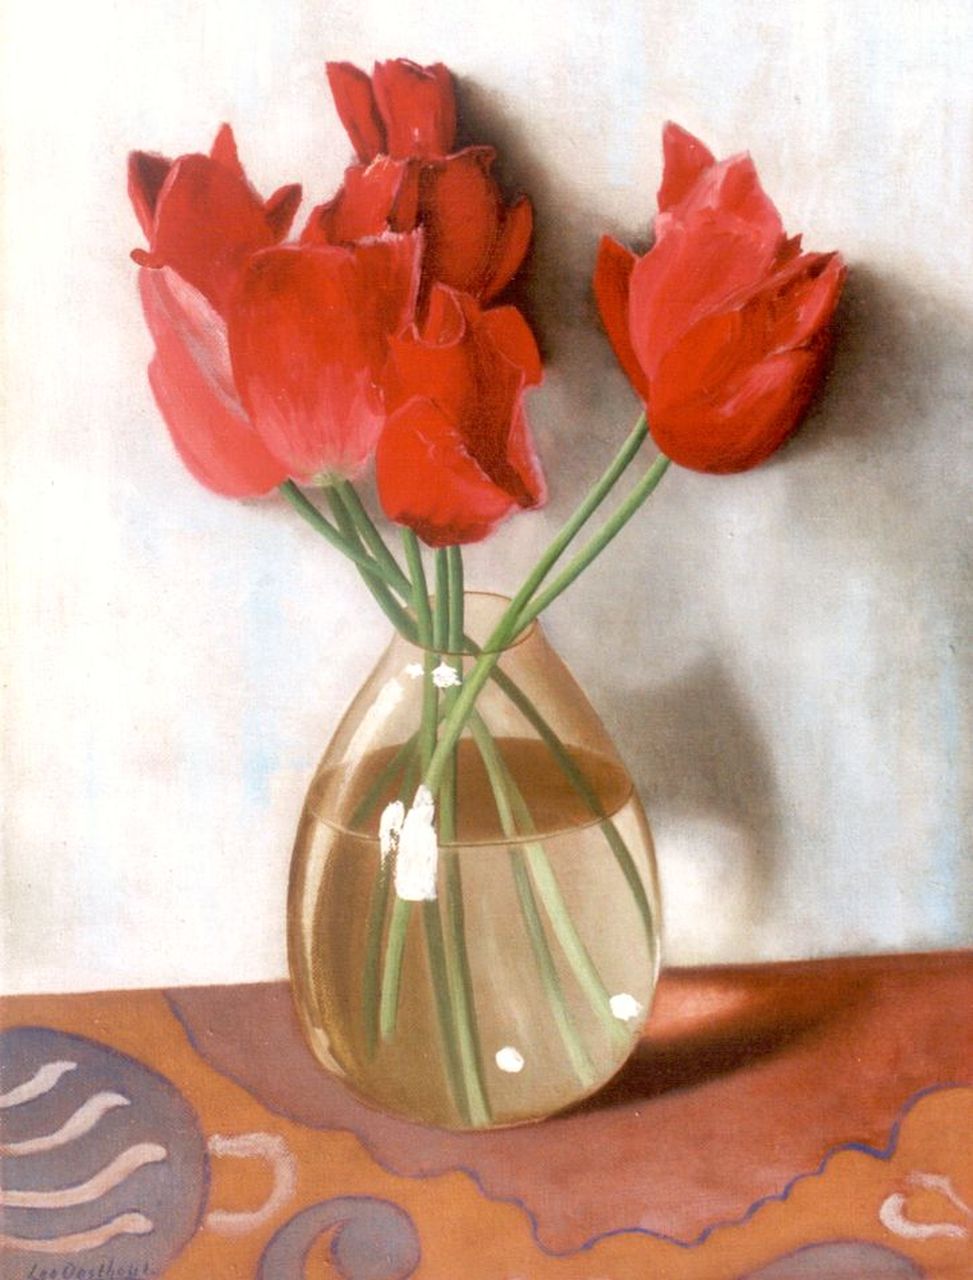 Leo Oosthout | Tulips in a vase, Öl auf Leinwand, 40,0 x 30,0 cm, signed l.l.